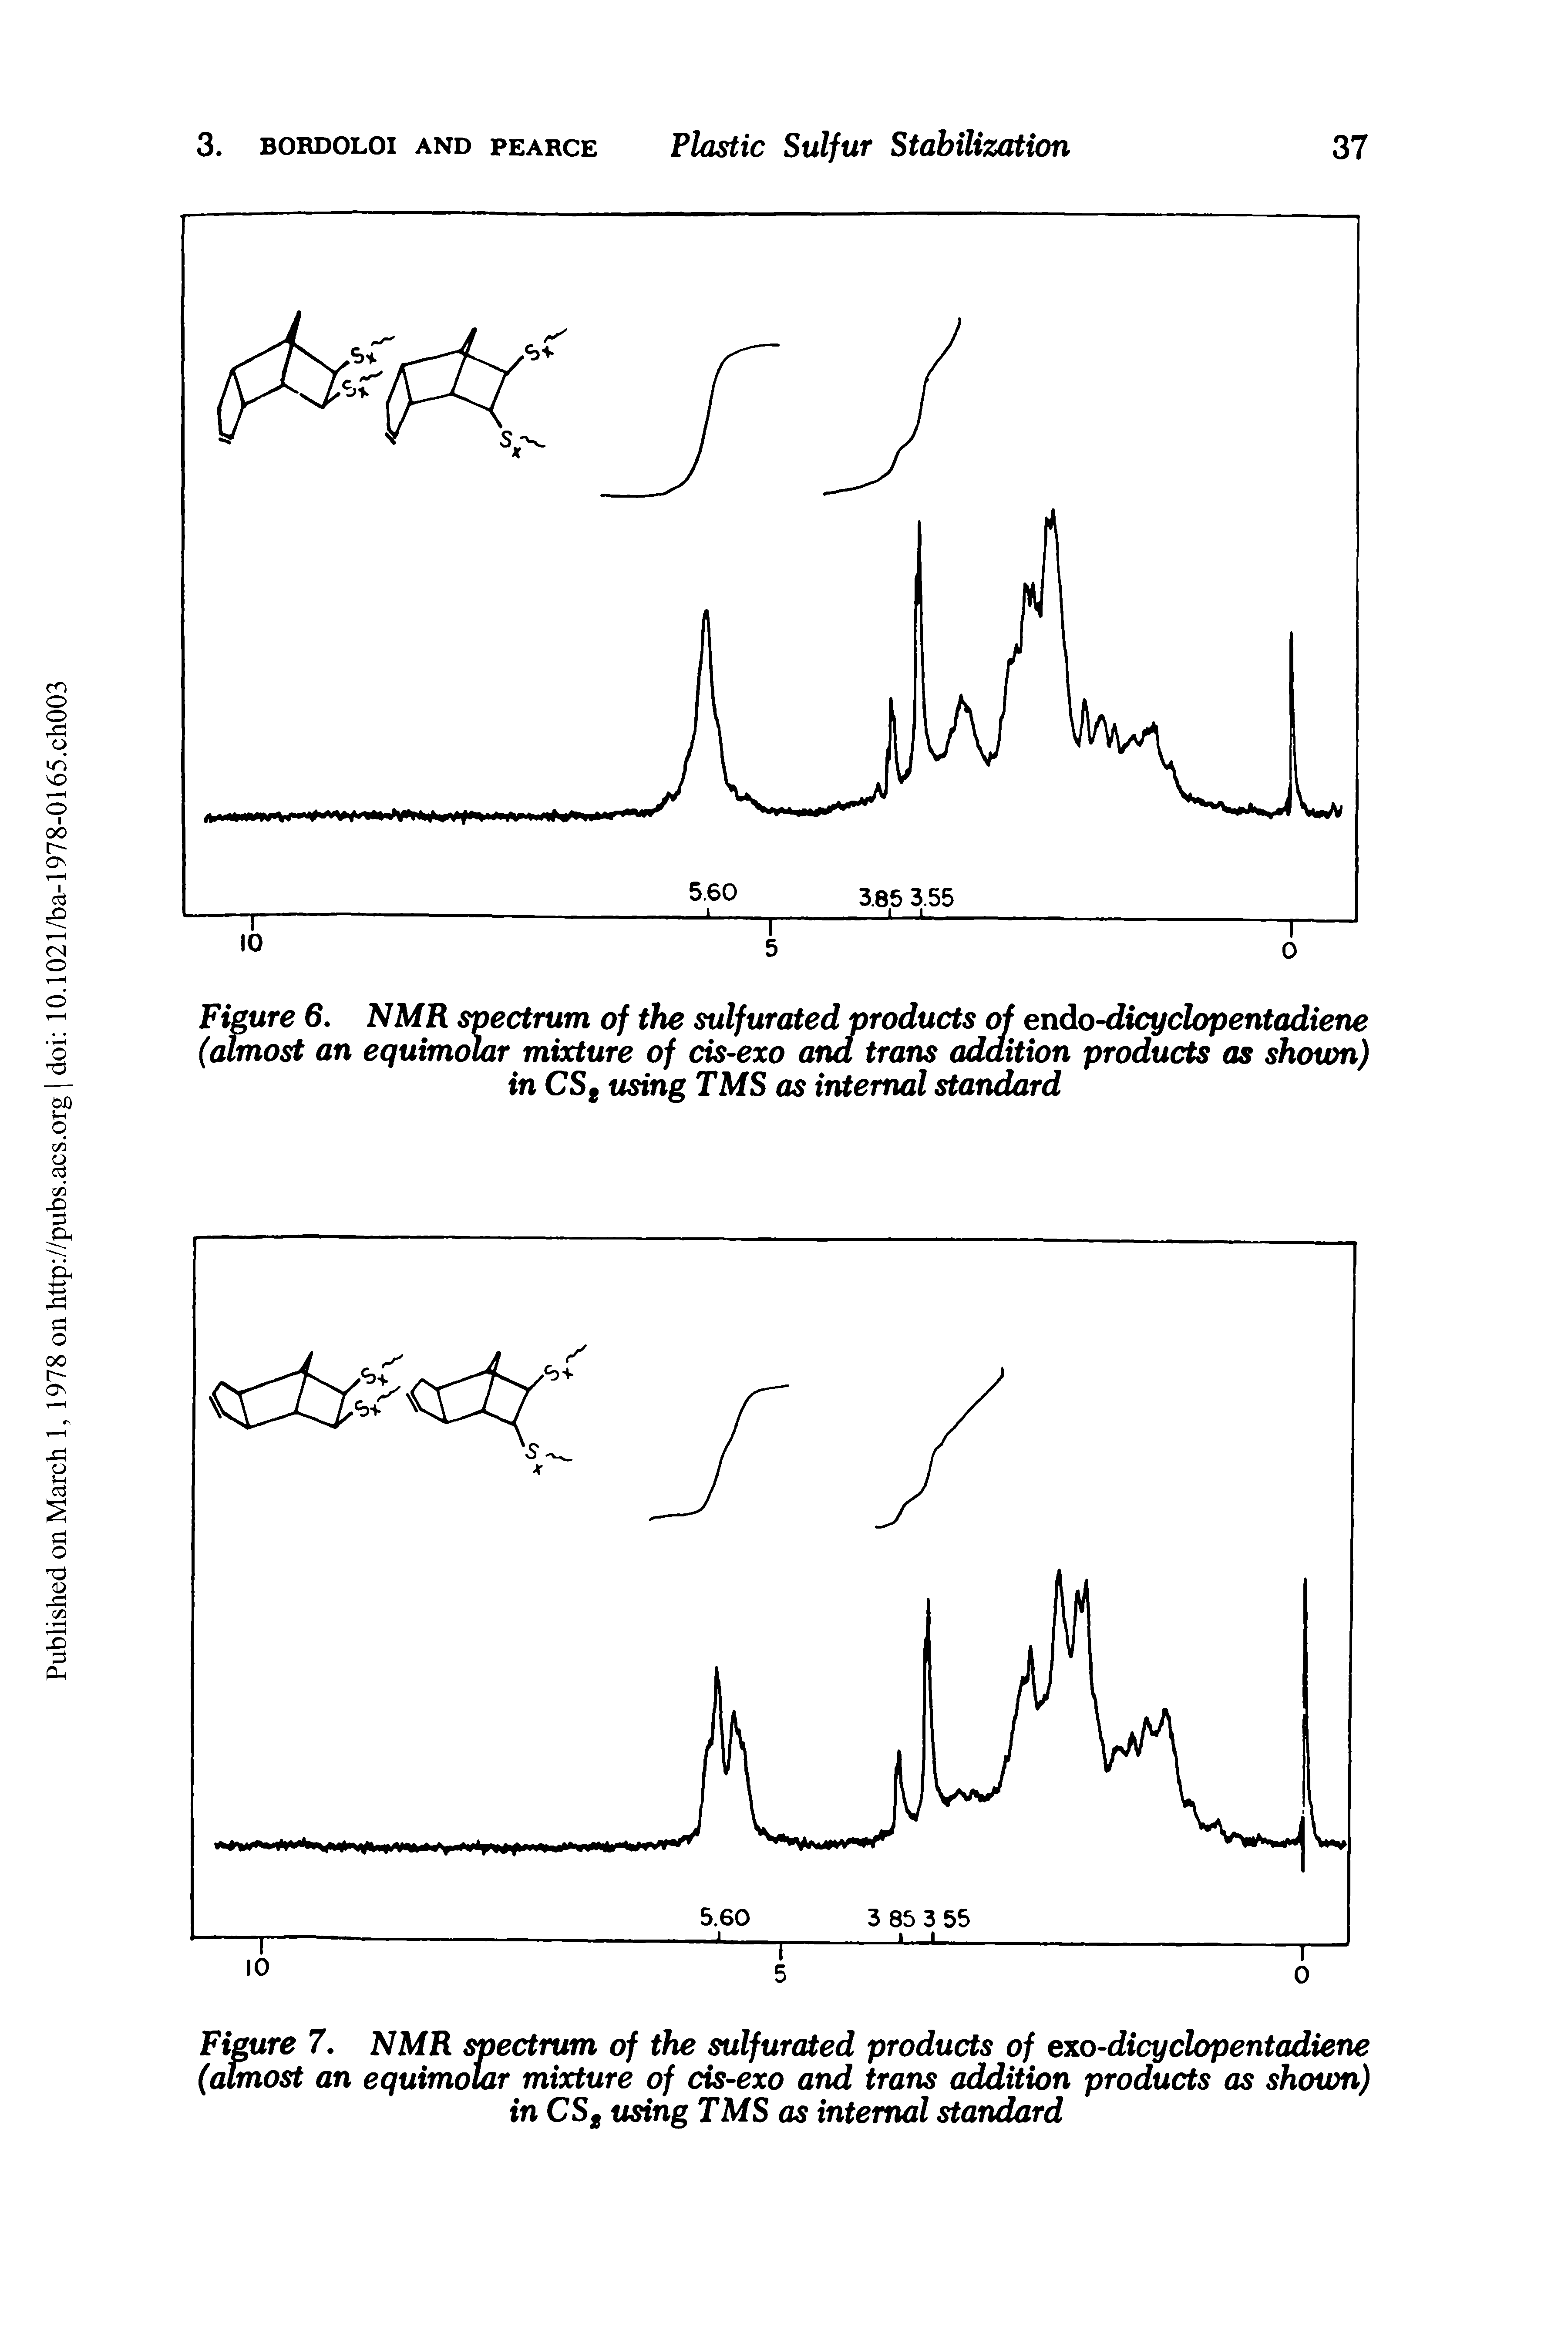 Figure 6. NMR spectrum of the sulfurated products of endo-dicyclopentadiene (almost an equimolar mixture of cis-exo and trans addition products as shown) in CSe using TMS as internal standard...